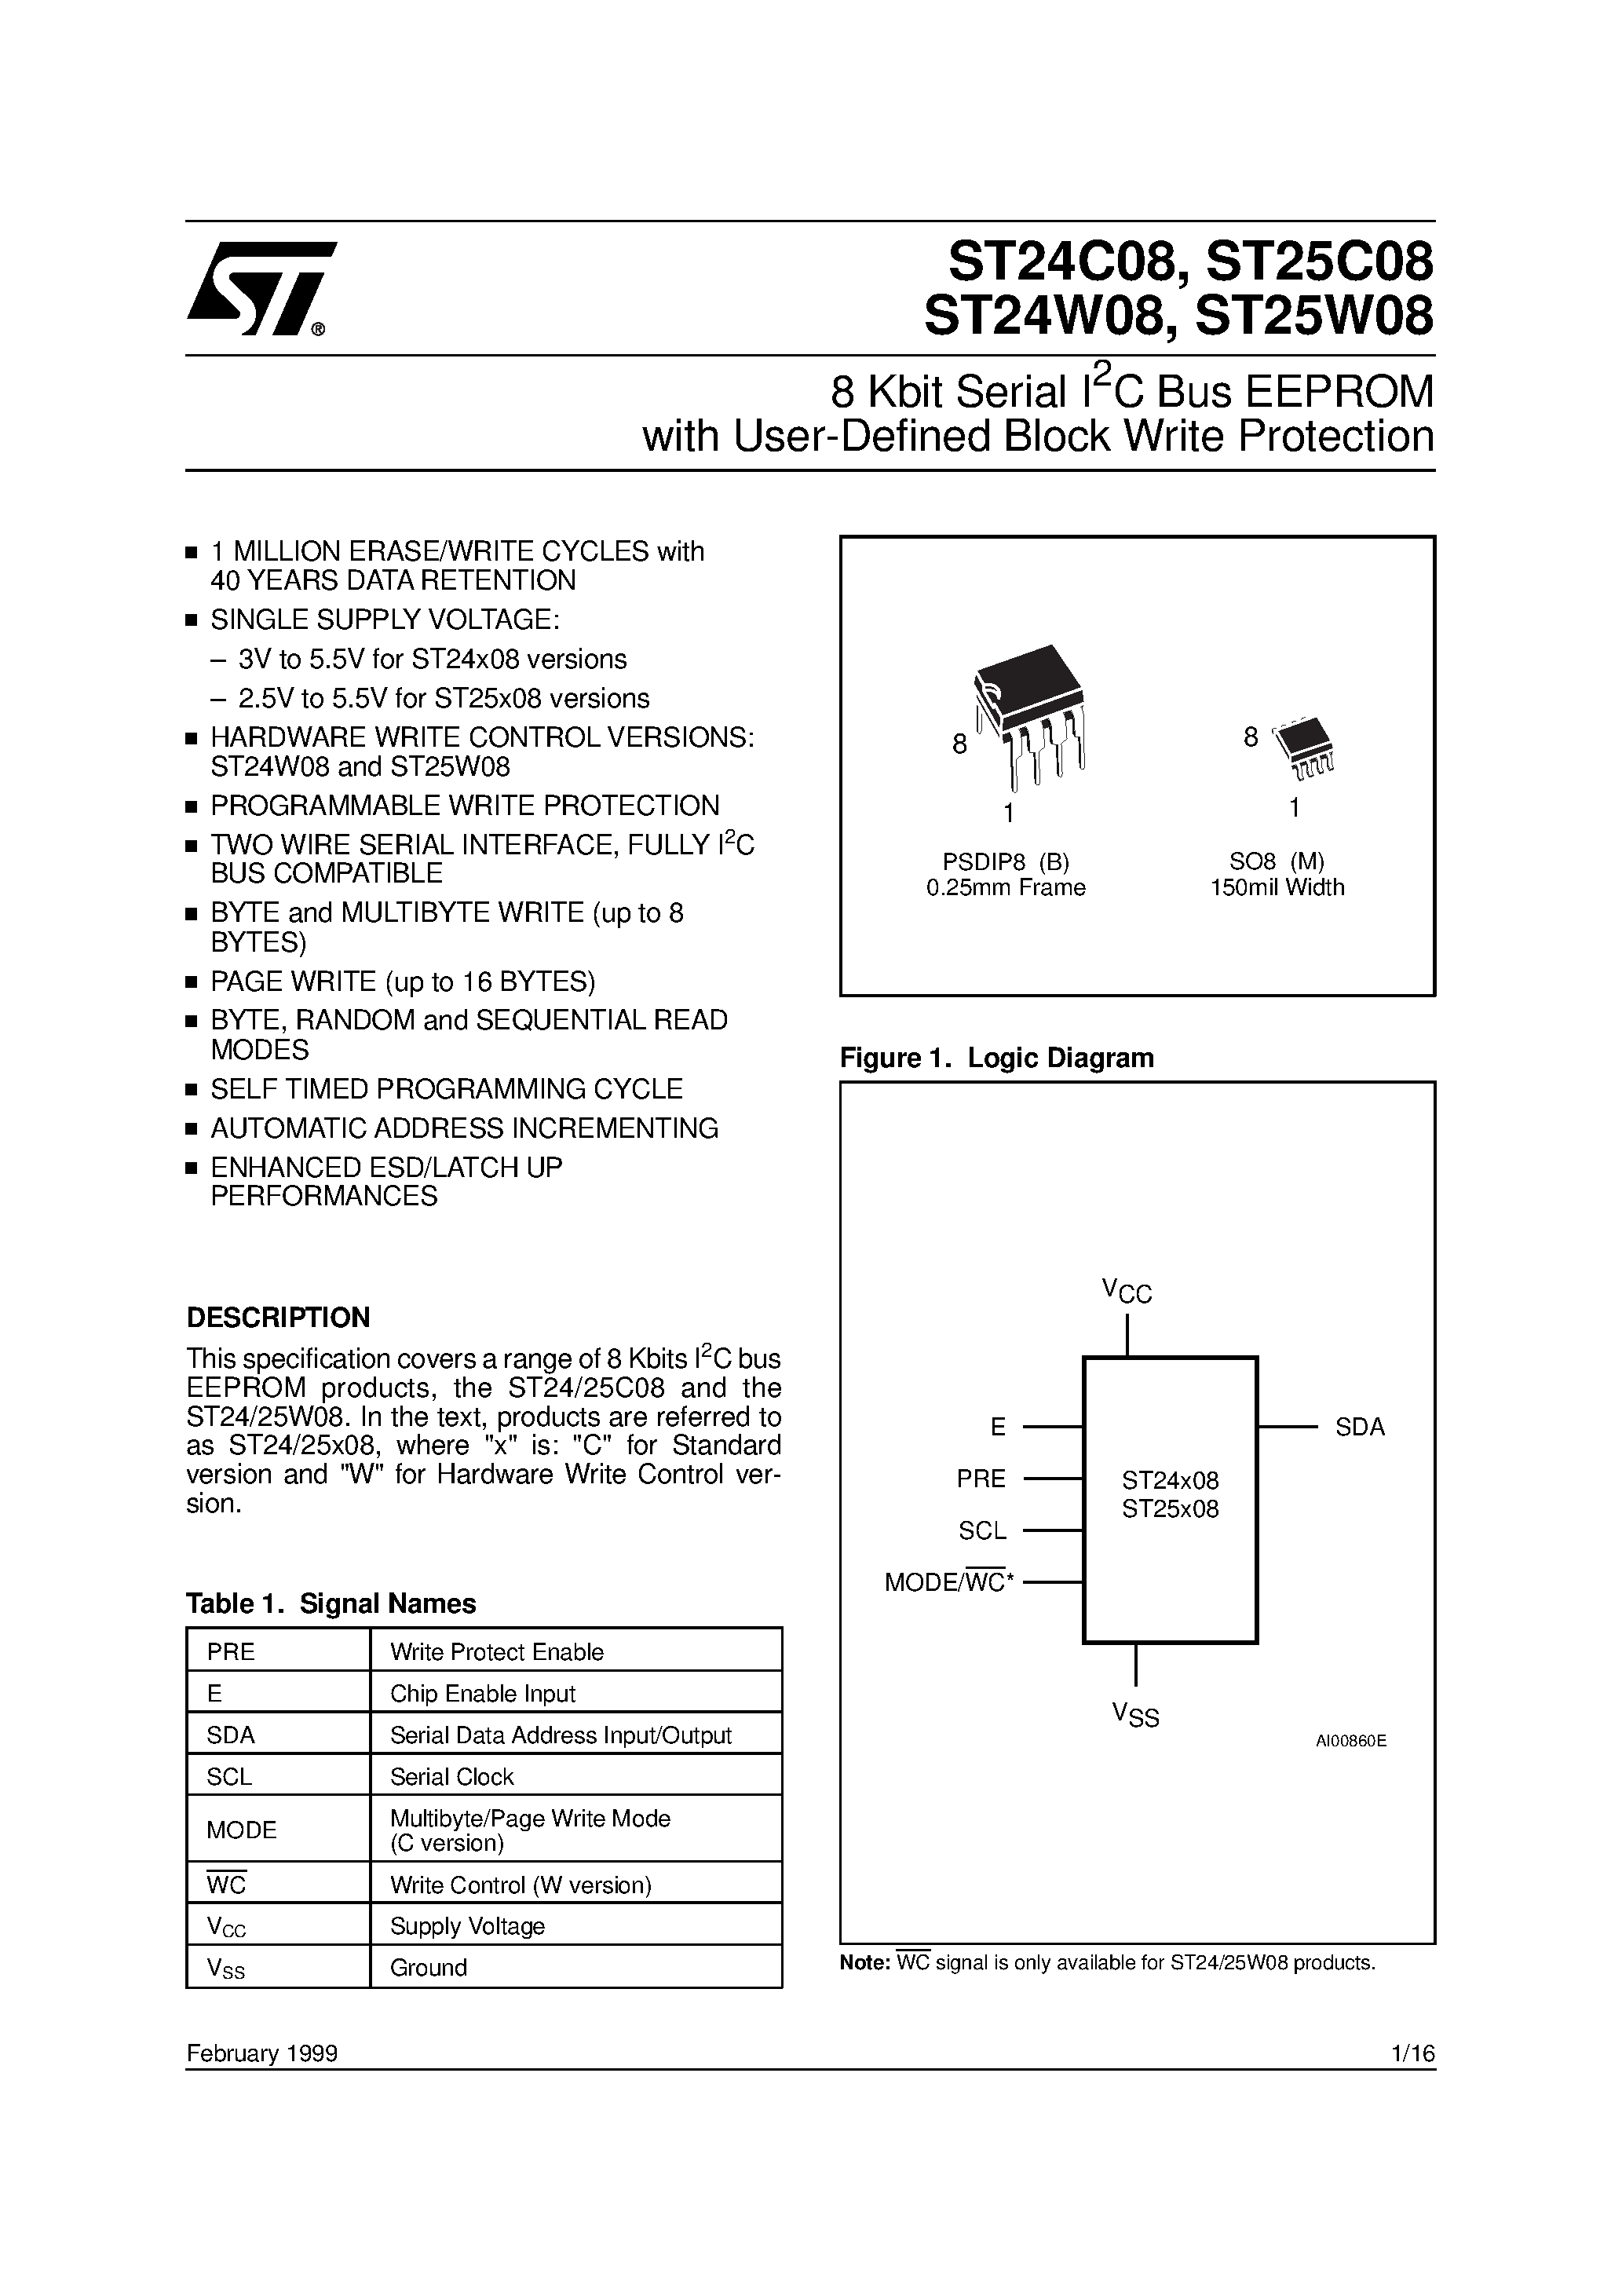 Datasheet ST24W08 - 8 Kbit Serial I2C Bus EEPROM with User-Defined Block Write Protection page 1